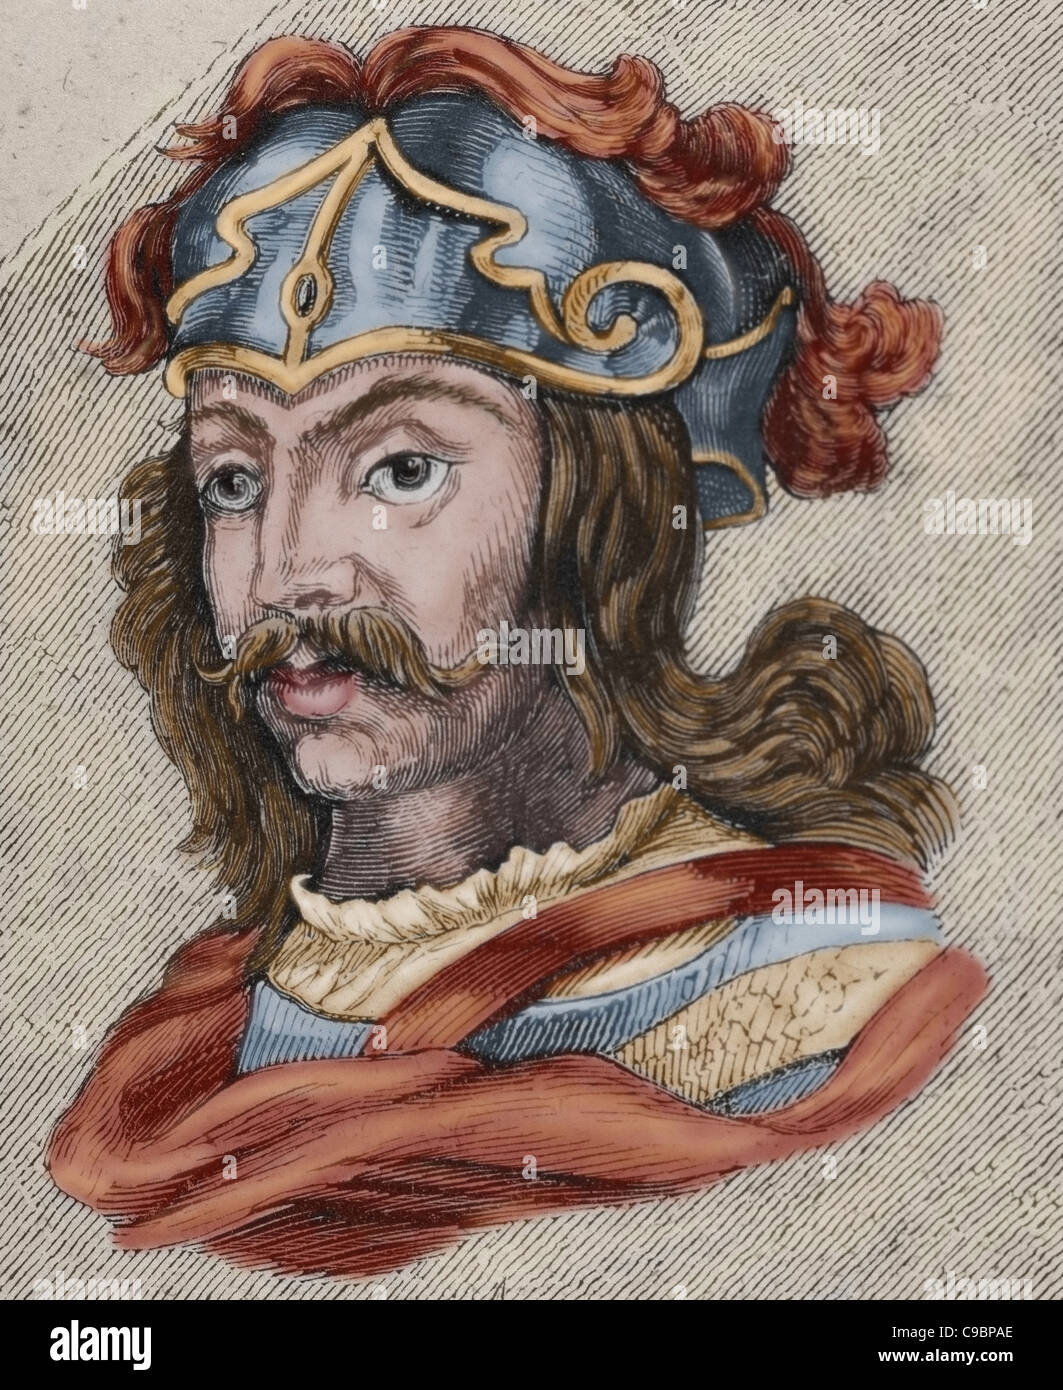 Chintila. Visigothic King of Hispania, Septimania and Galicia from 636-640. Colored engraving. Stock Photo